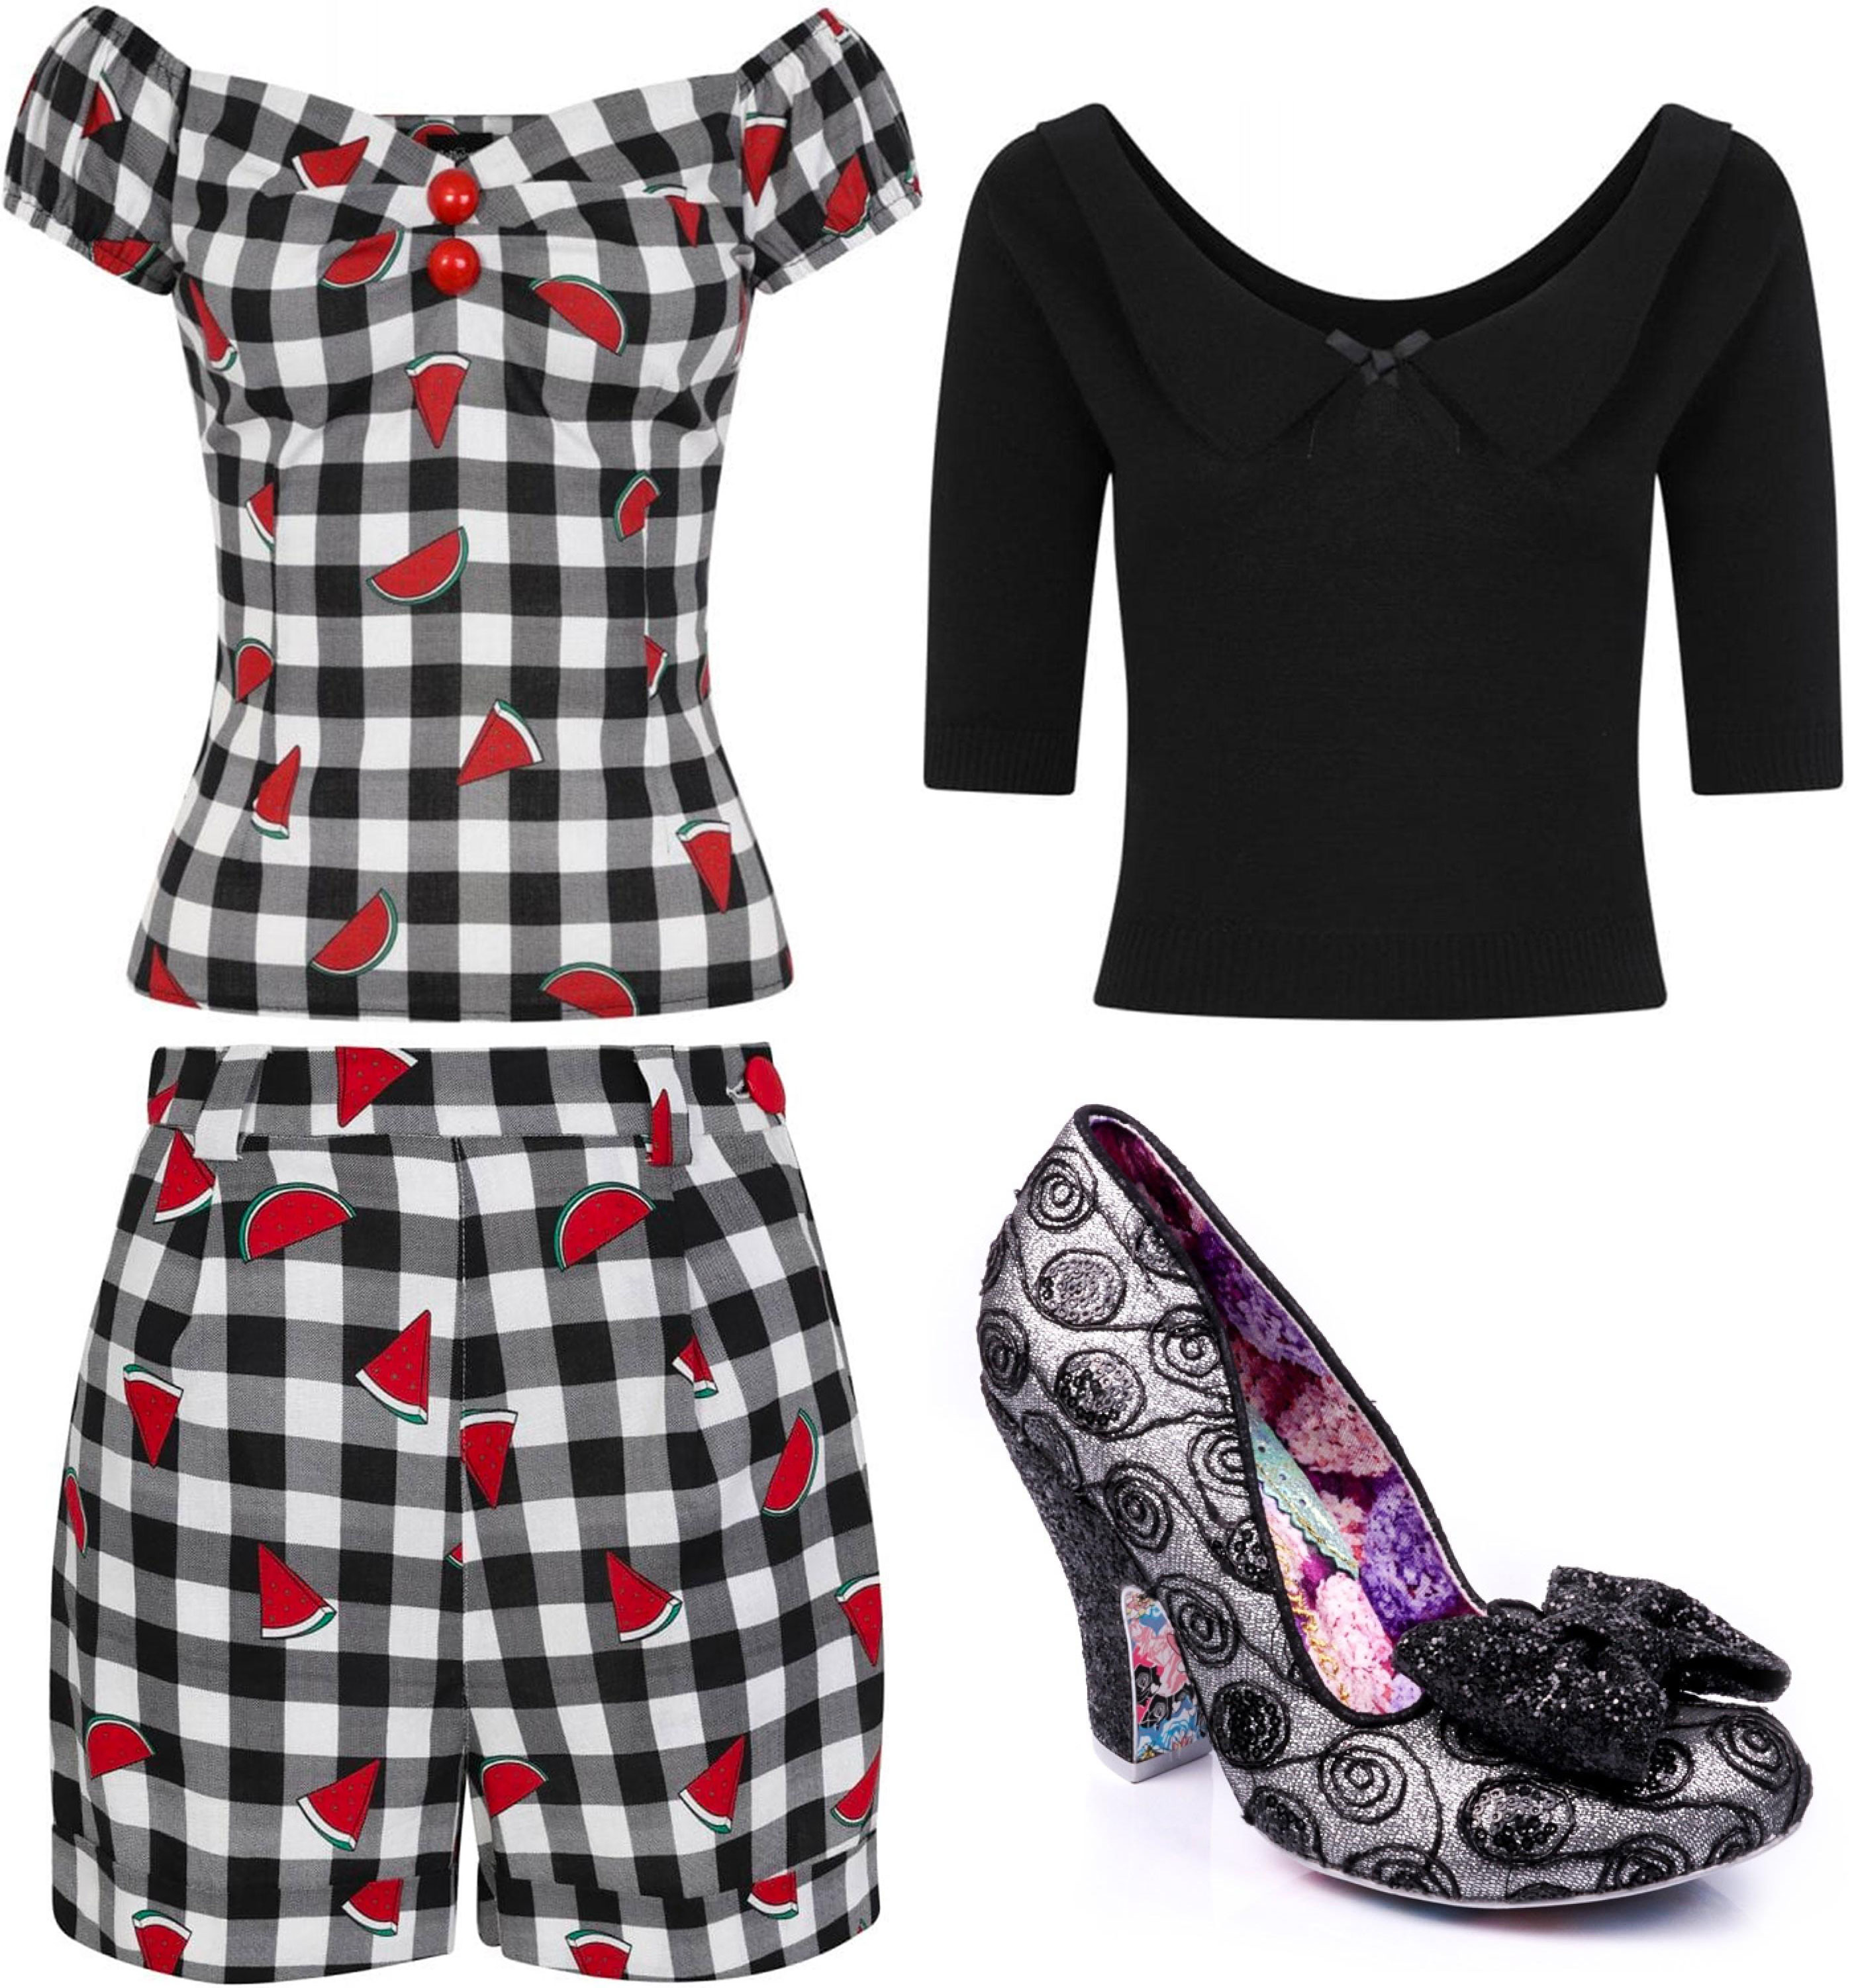 Collectif gingham top and shorts with Babette jumper and Nick of Time heels